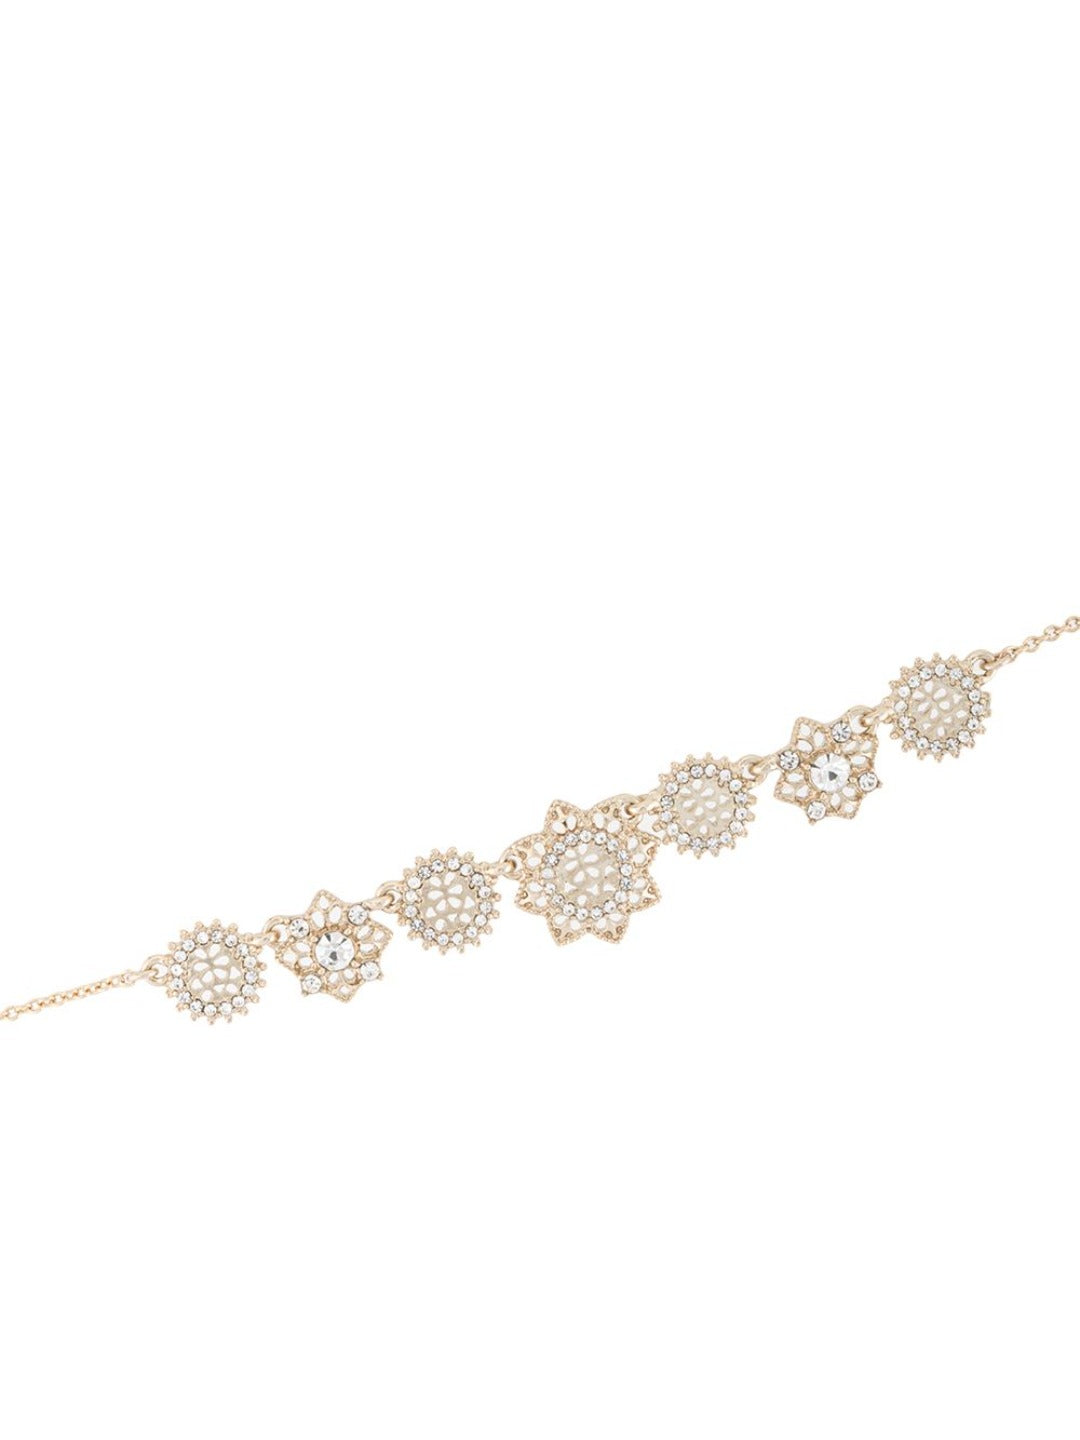 Filigree Frontal Necklace Marchesa